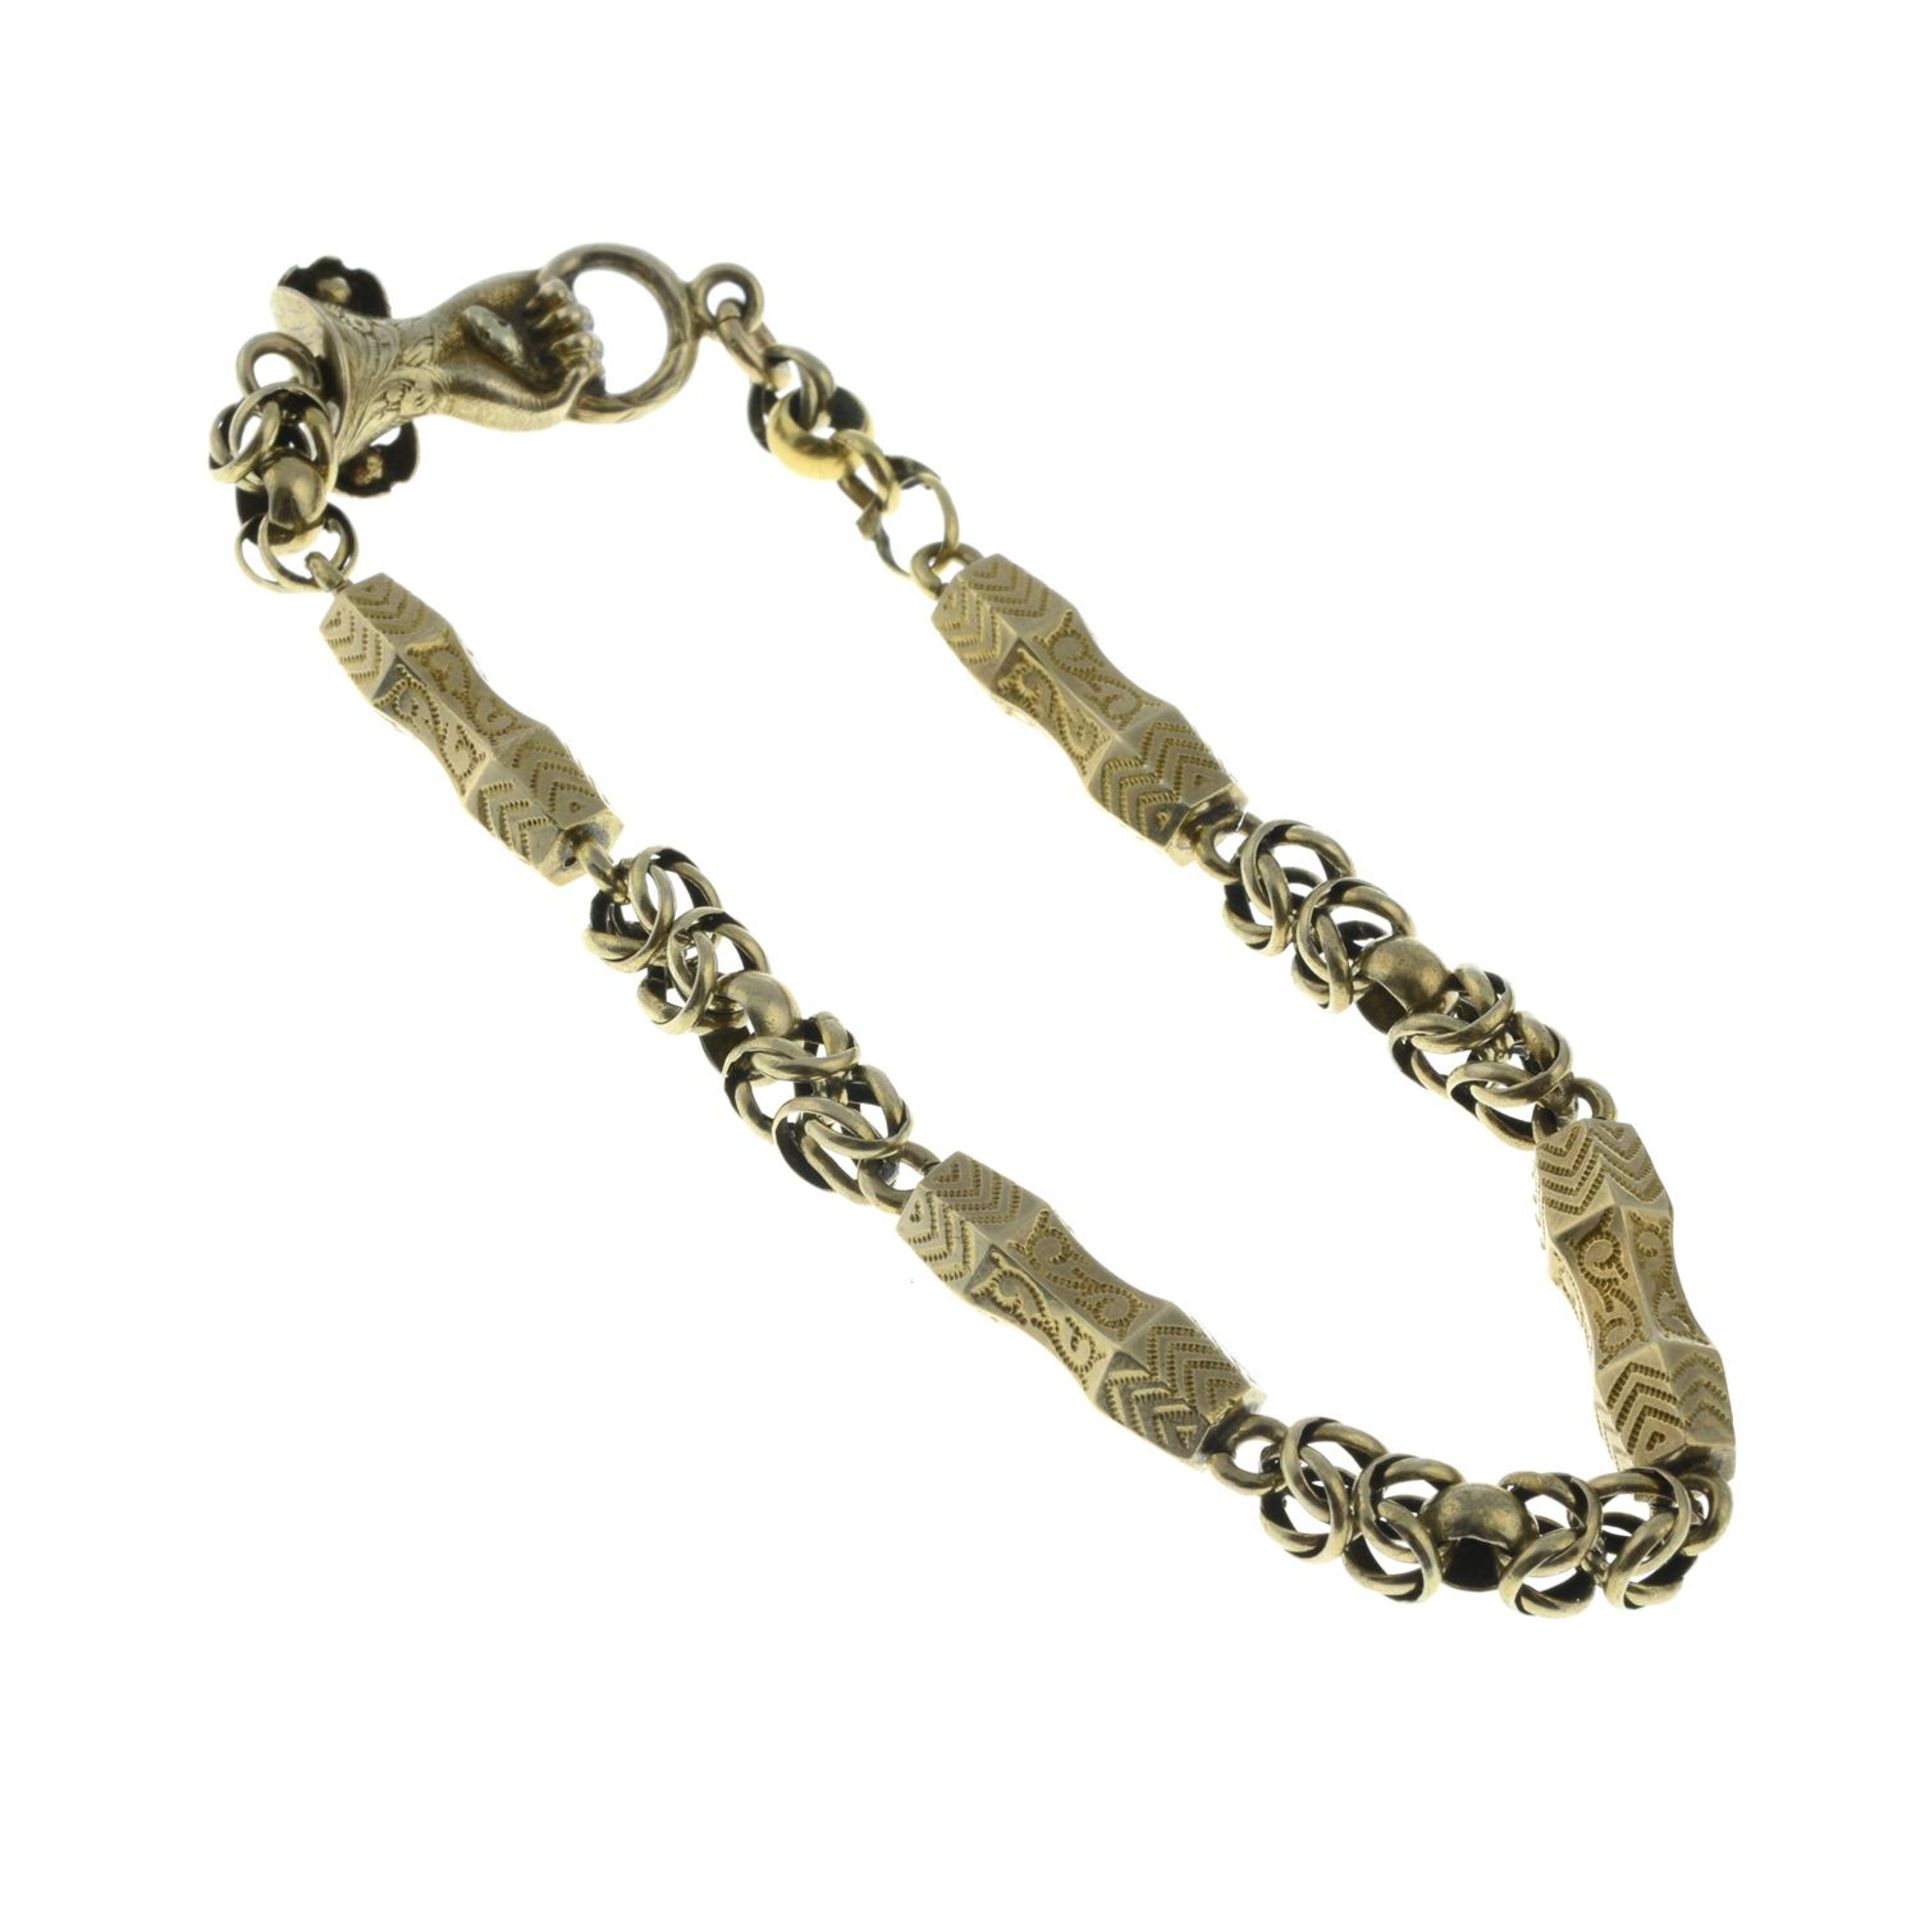 An early to mid 19th century gold, engraved spacer Kings-link bracelet, with ruby ring accent - Image 3 of 3